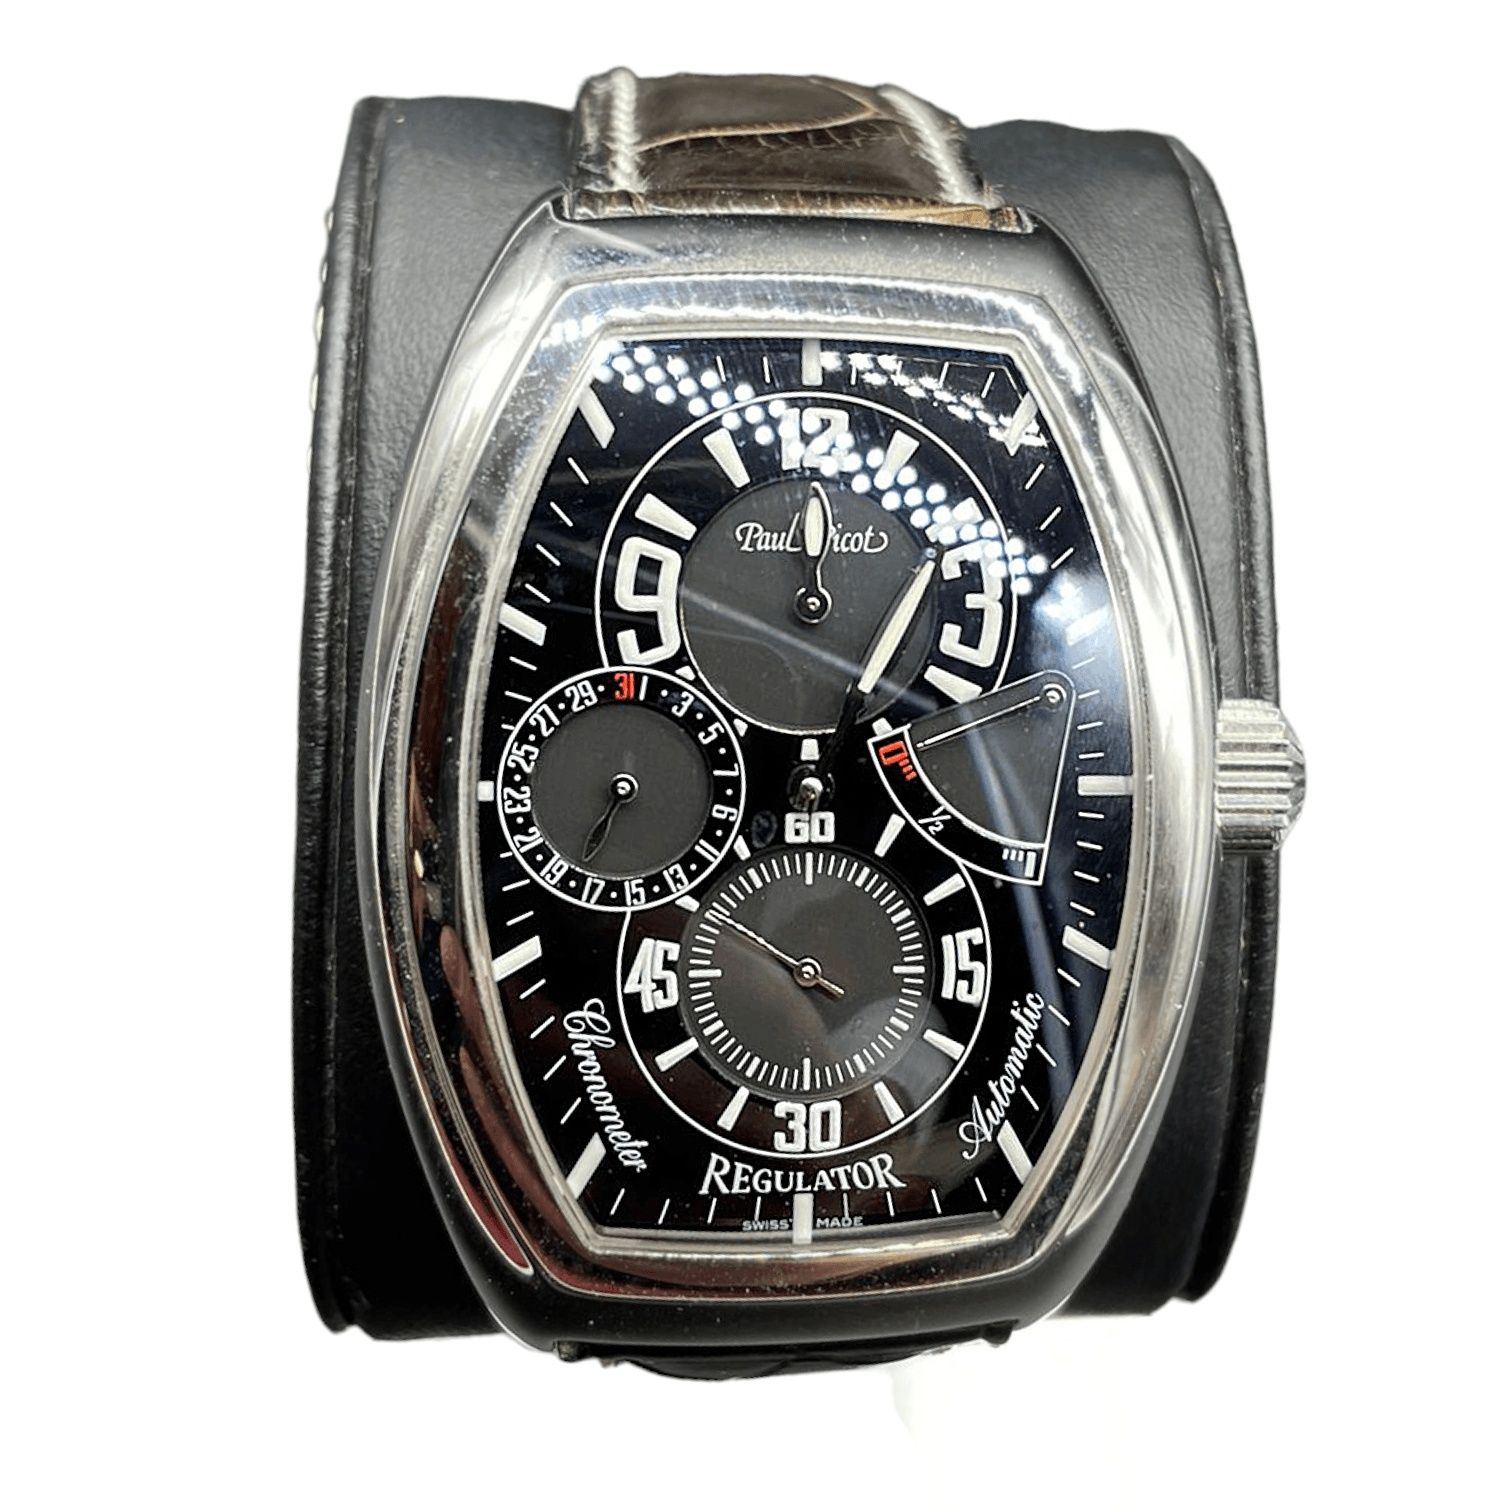 Paul Picot Firshire 3000 Regulateur Ref. 0740S - ON5835 - LuxuryInStock